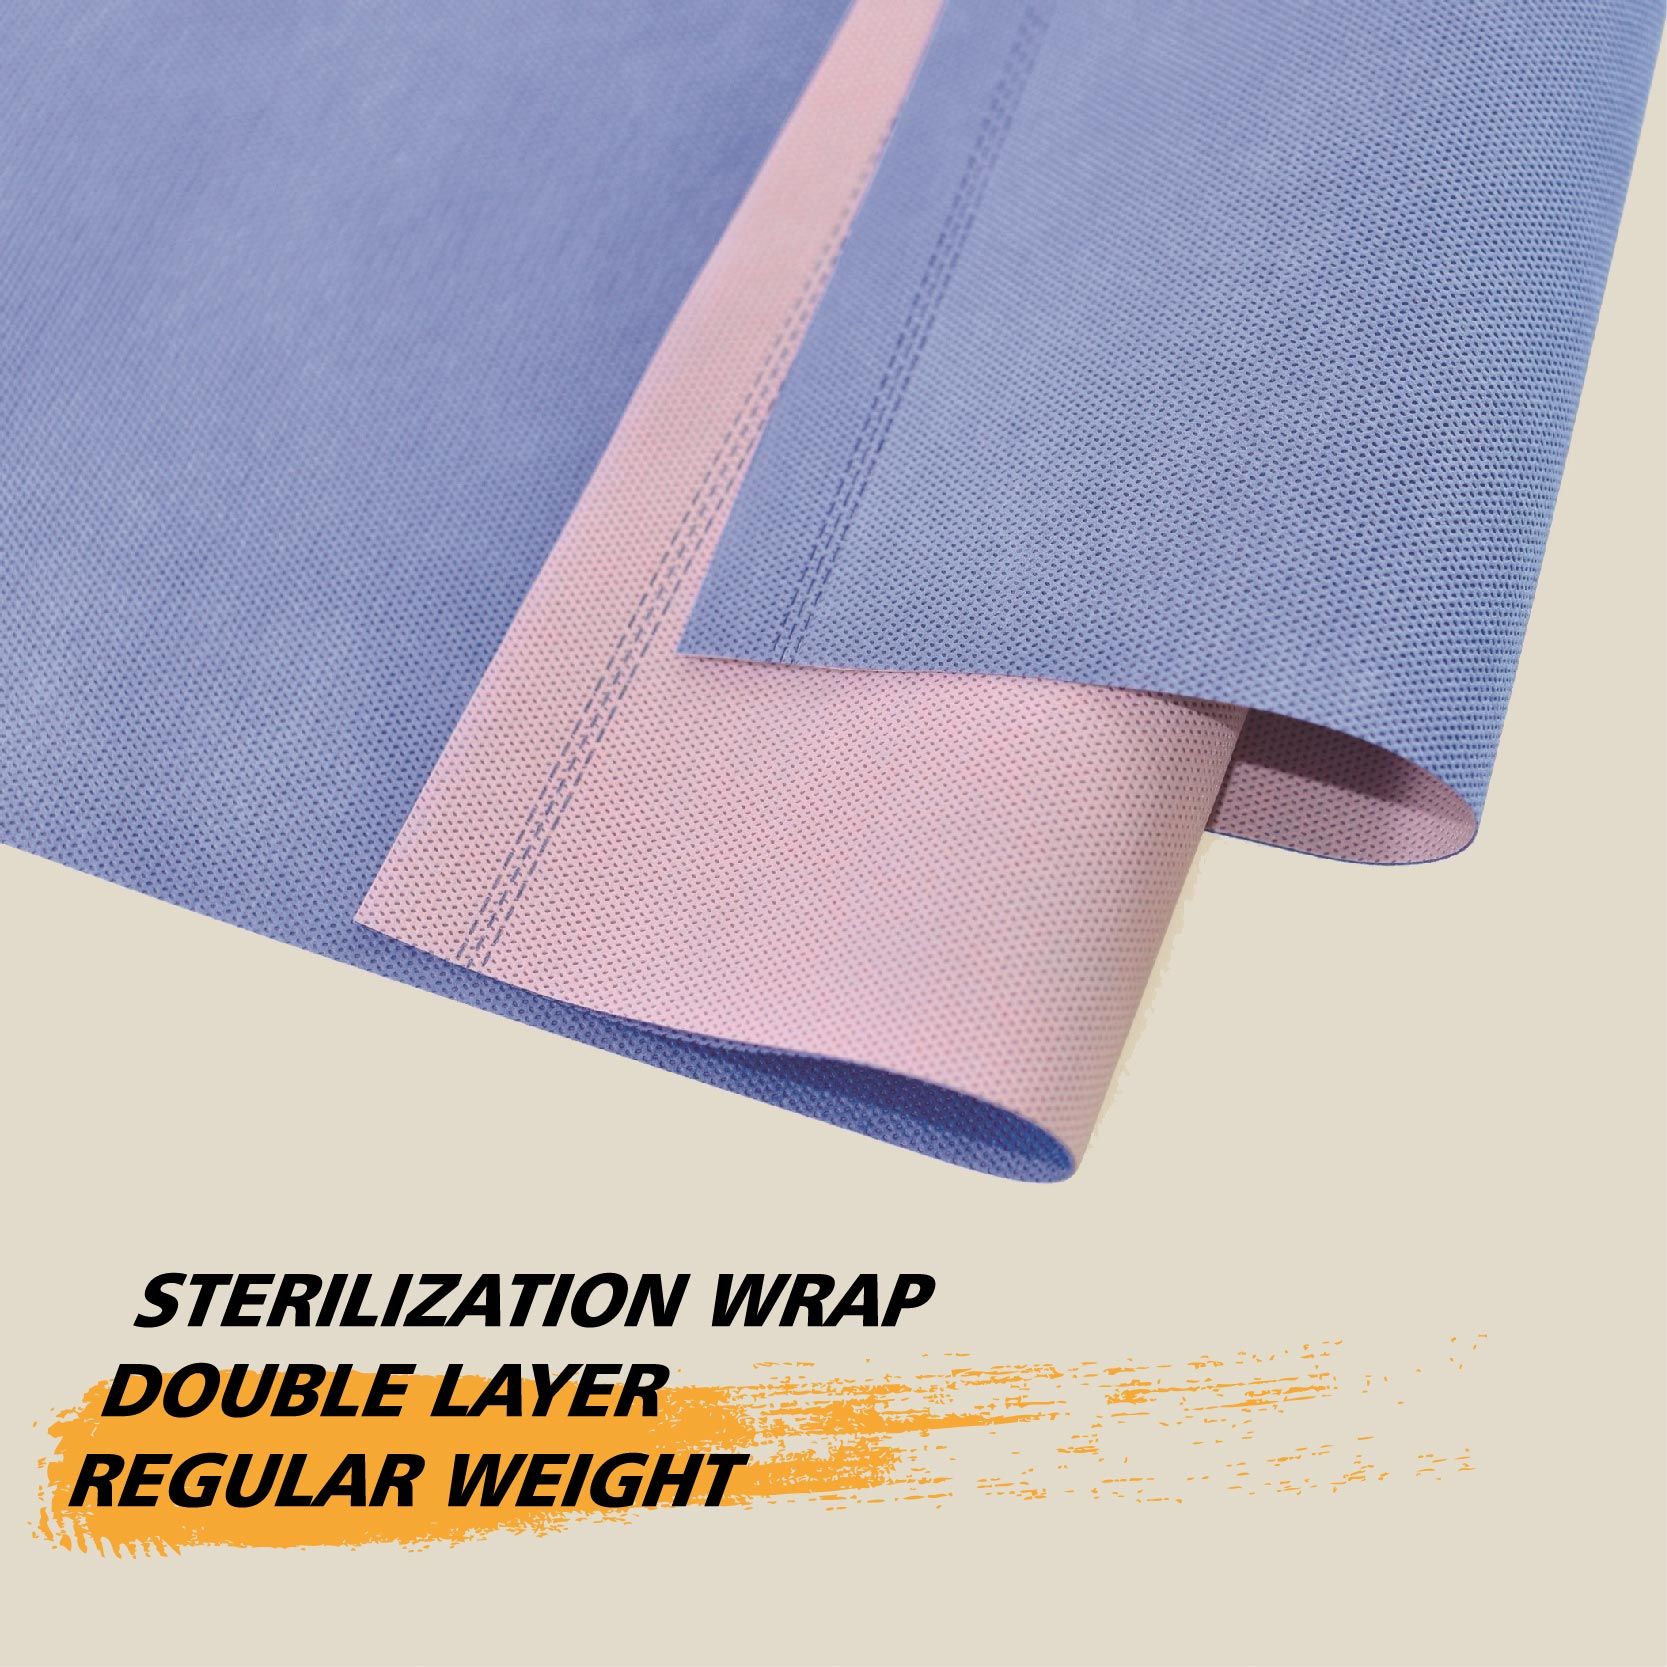 Sterlization Wrap-Double layer-Regular Weight - PMC200- please call  02- 9881 0368 for stock availability